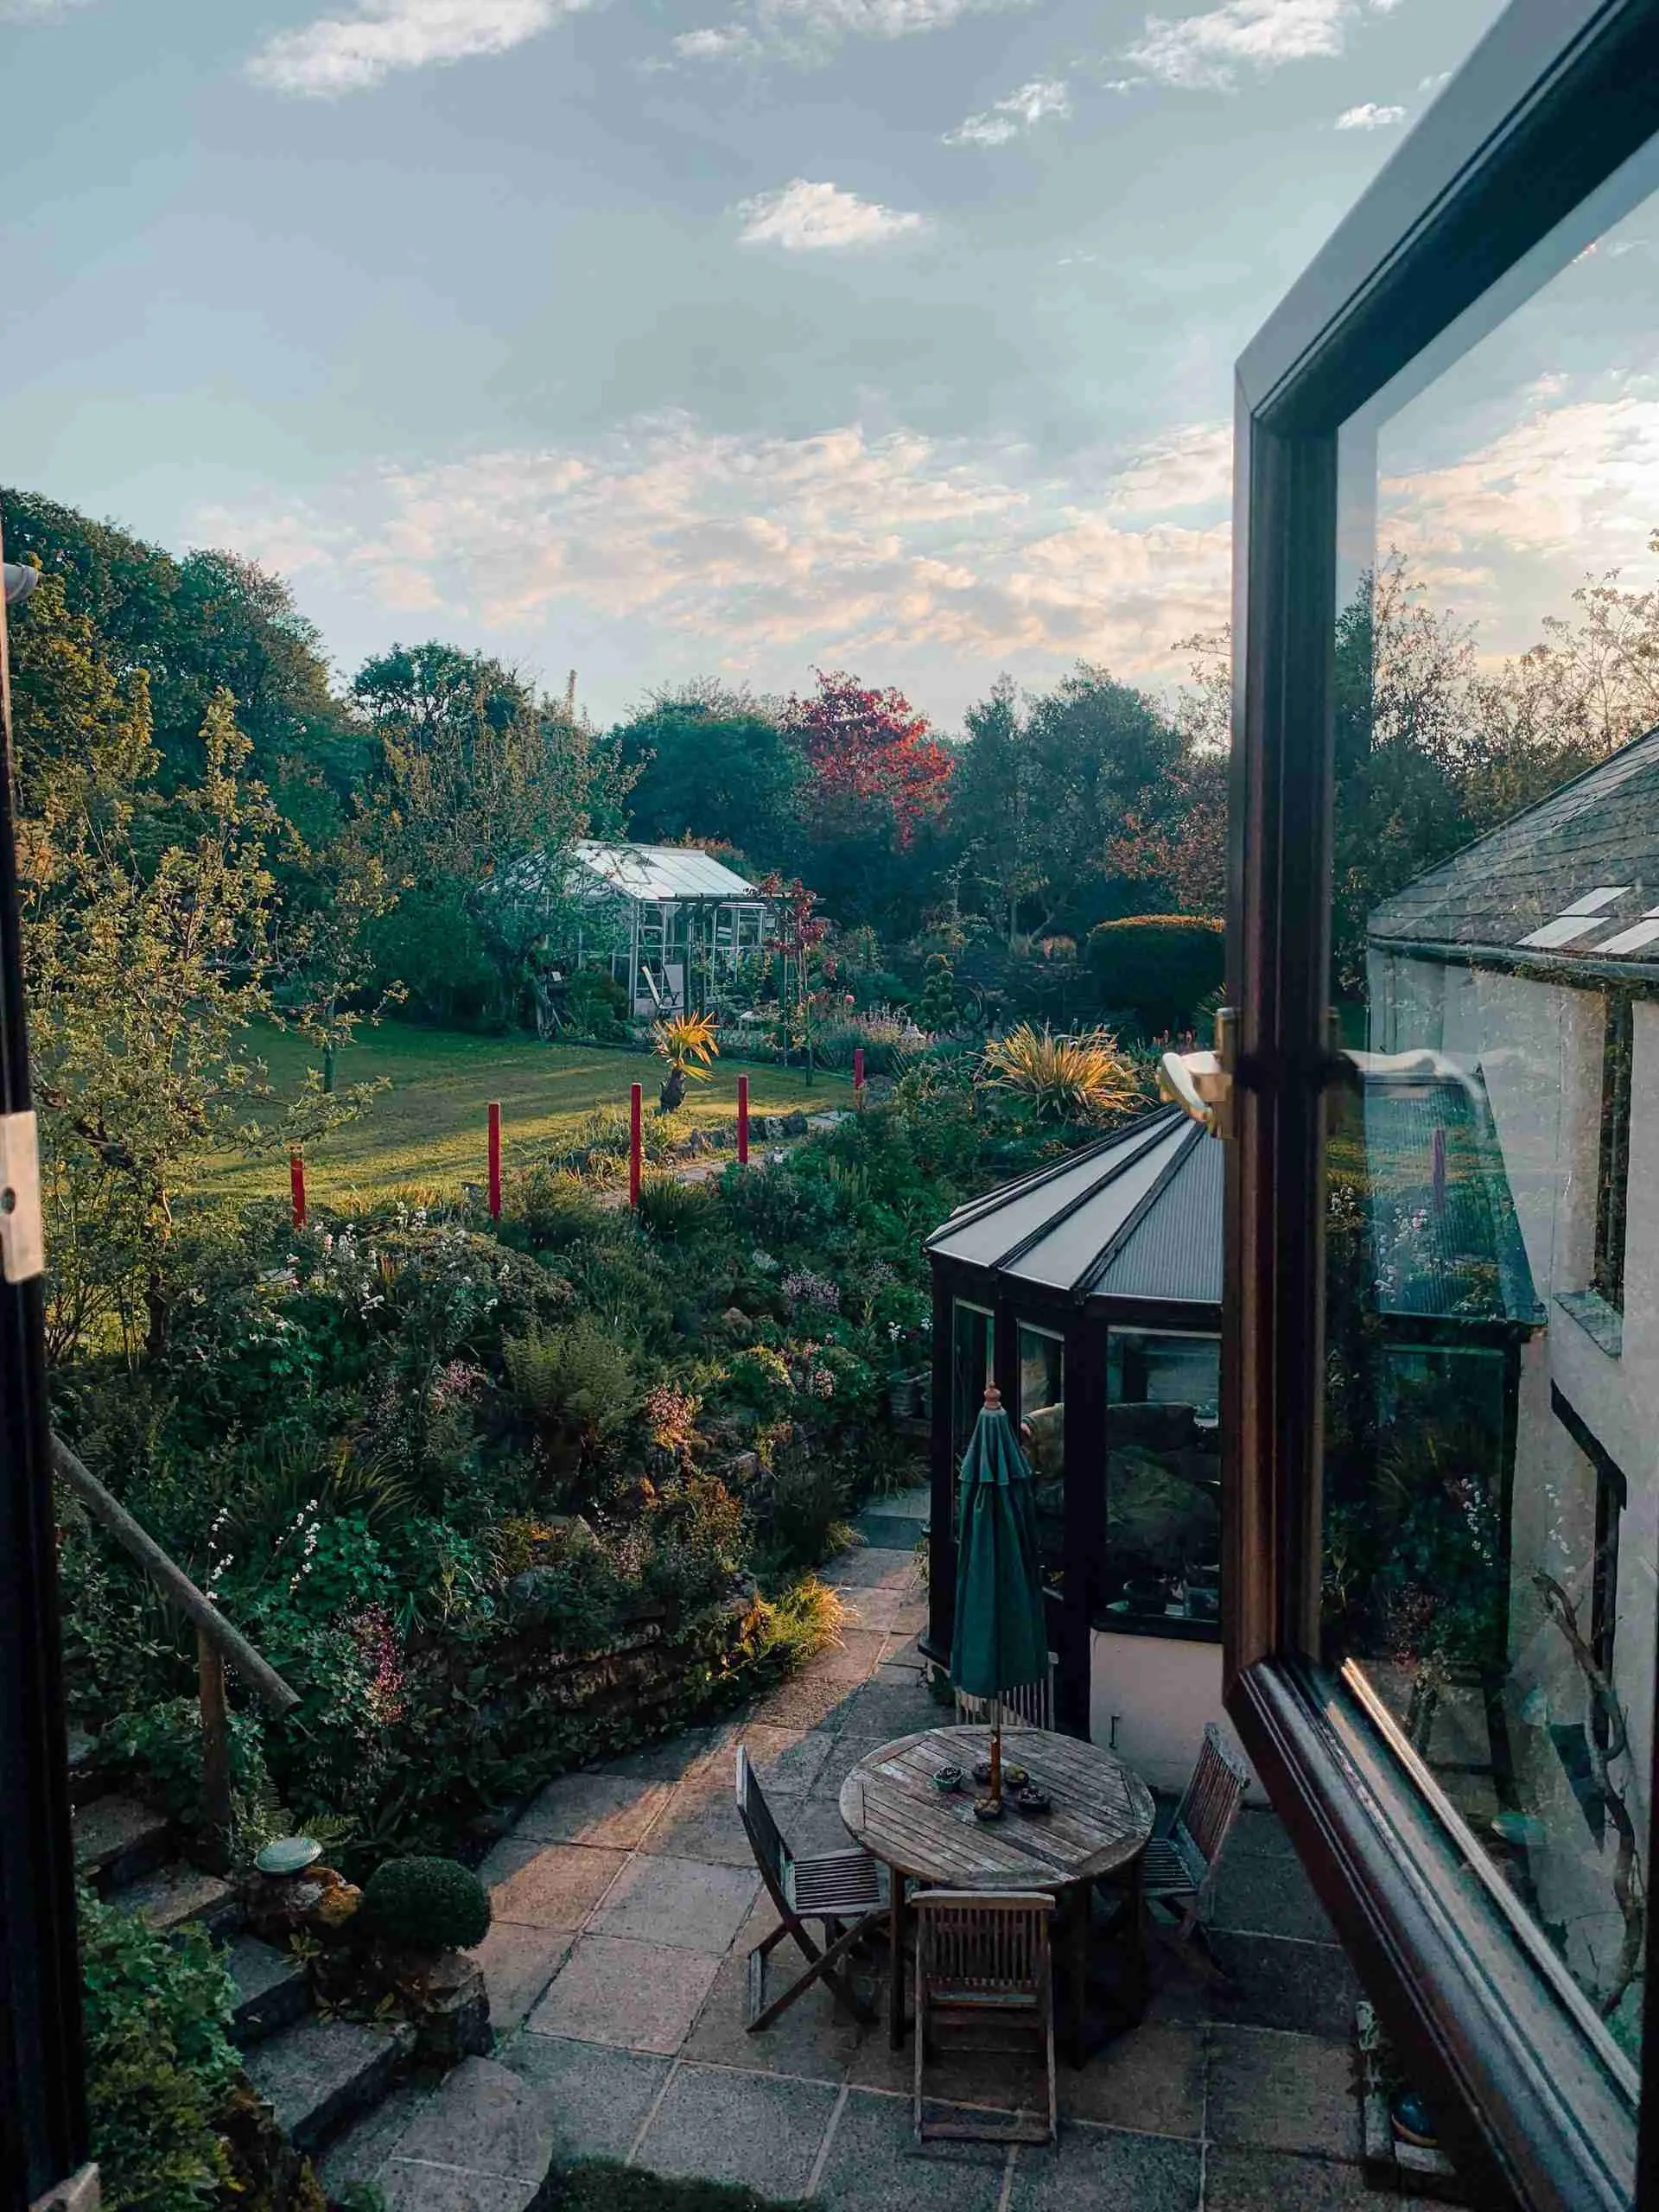 a view out of the window of our Airbnb in Cornwall. The photo is taken from inside looking out their window on their beautiful patio and in the background you can see their spacious gardens!